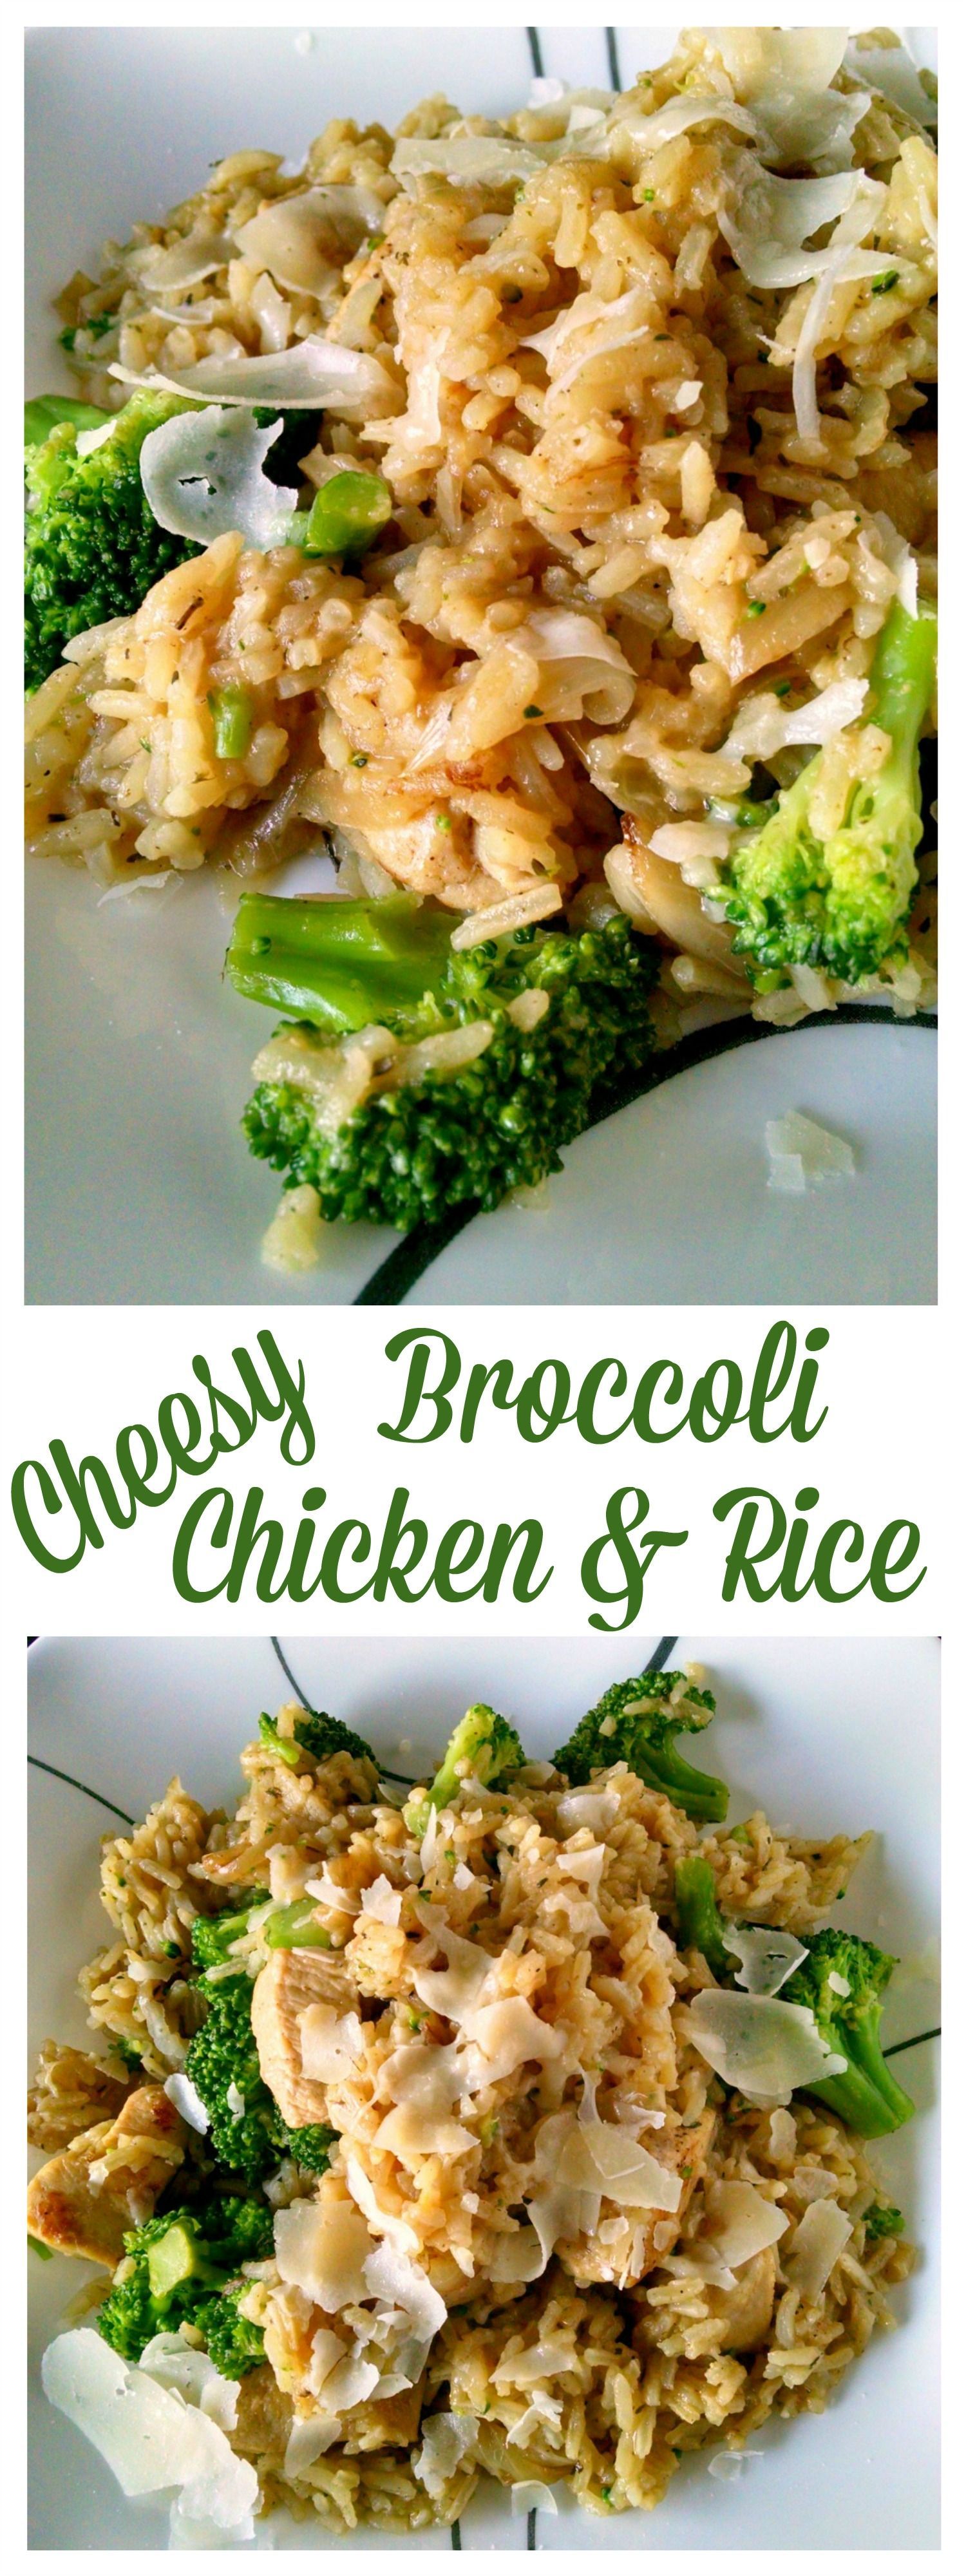 A delicious one skillet meal, this Cheesy Broccoli Chicken and Rice is hearty and full of flavor.